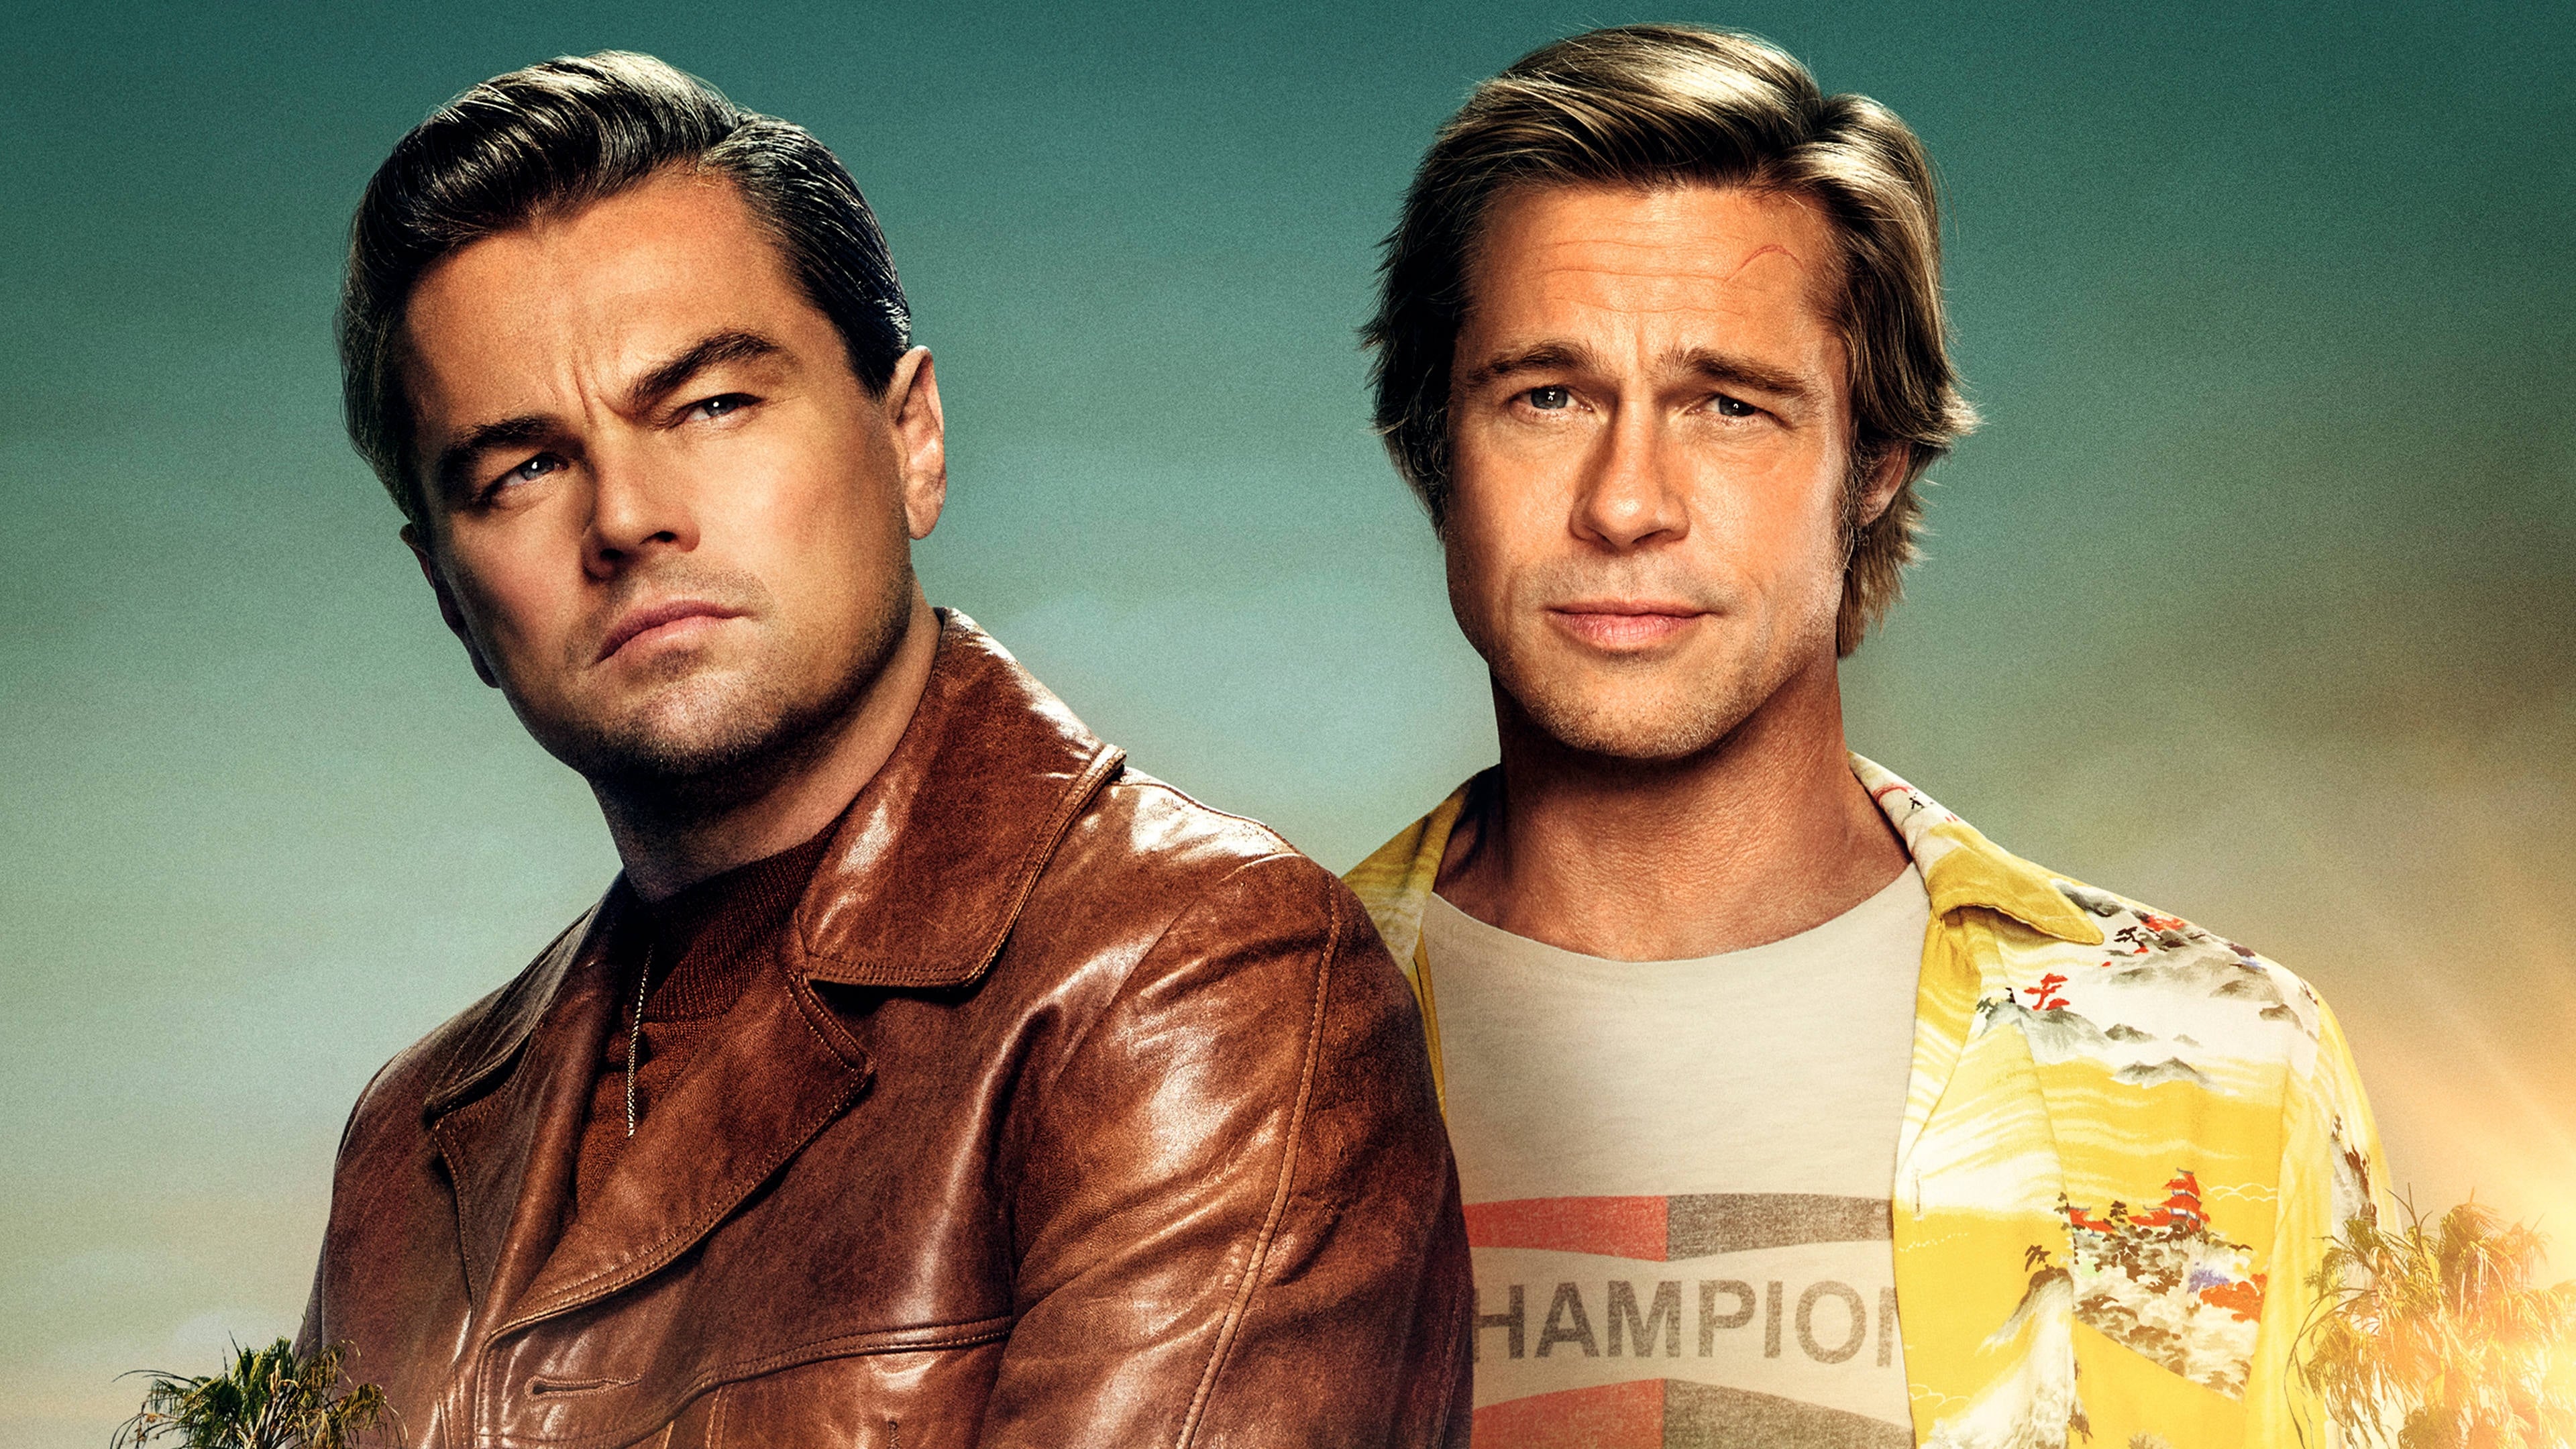 Image du film Once Upon a Time... in Hollywood xwgbhc2fgoirqitl8jzwxxdsr9ujpg